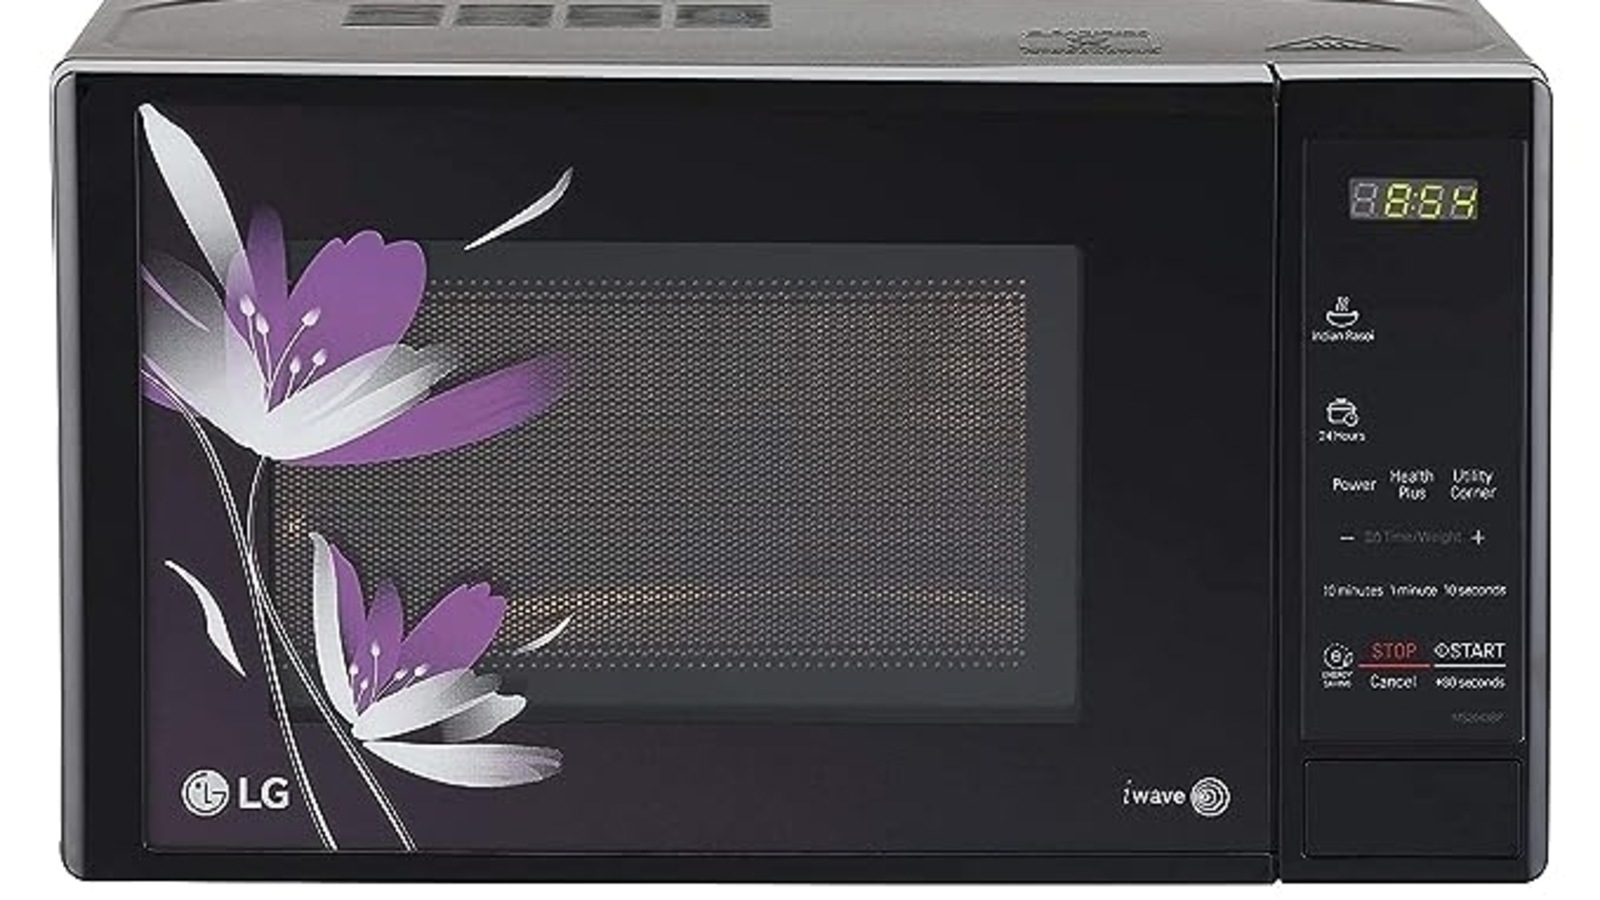 LG to Morphy Richards, check out the top 5 microwave ovens; get up to 44% discount